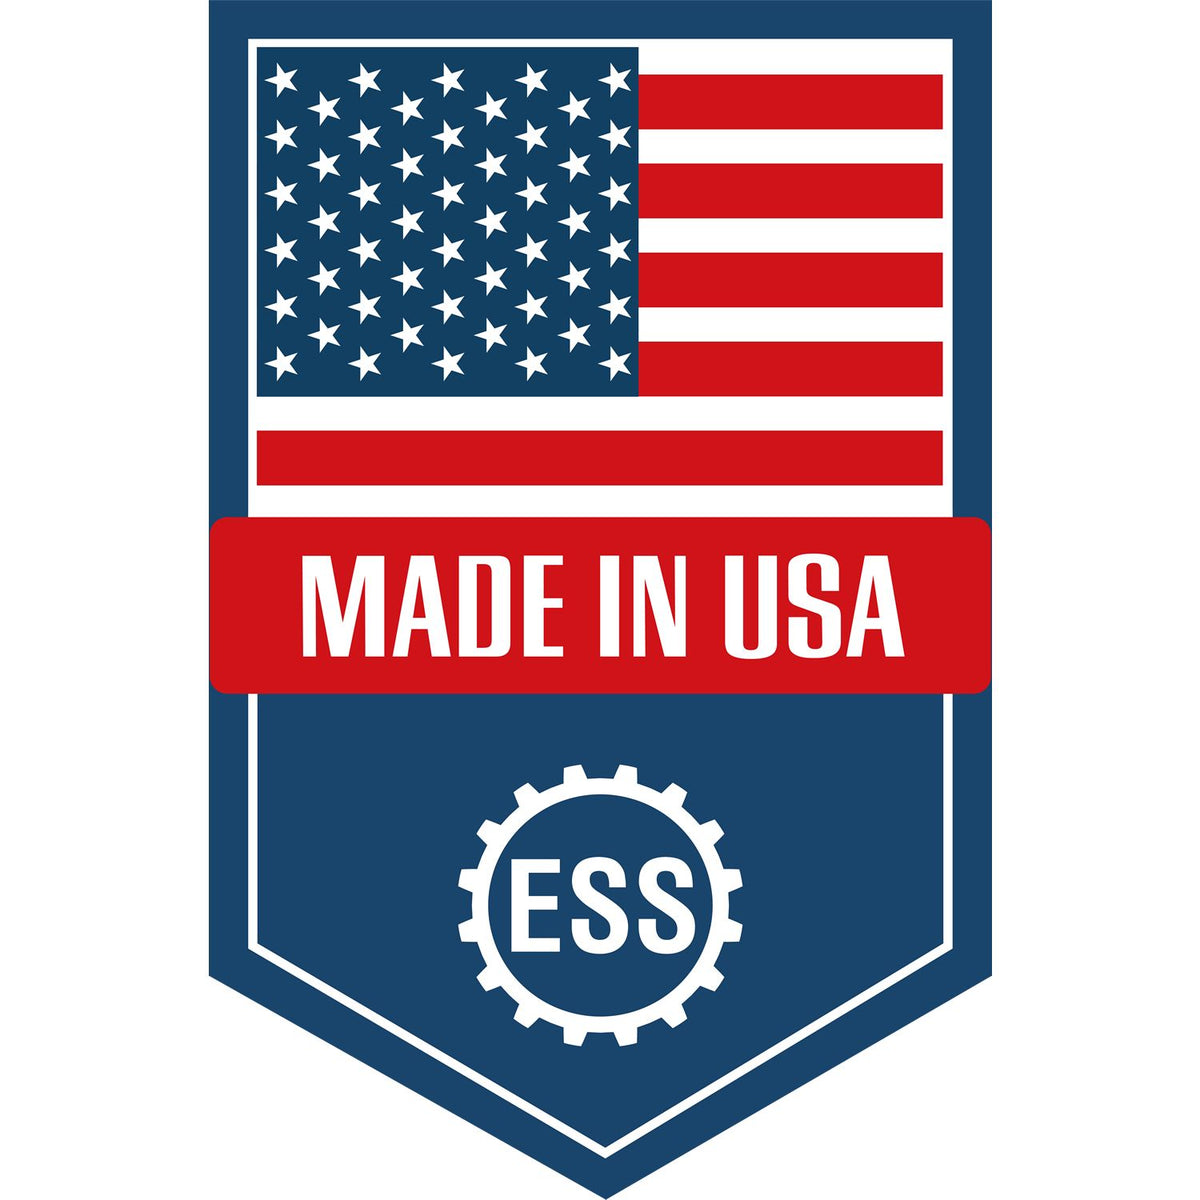 An icon or graphic with an american flag and text reading Made in USA for the Slim Pre-Inked Washington Landscape Architect Seal Stamp